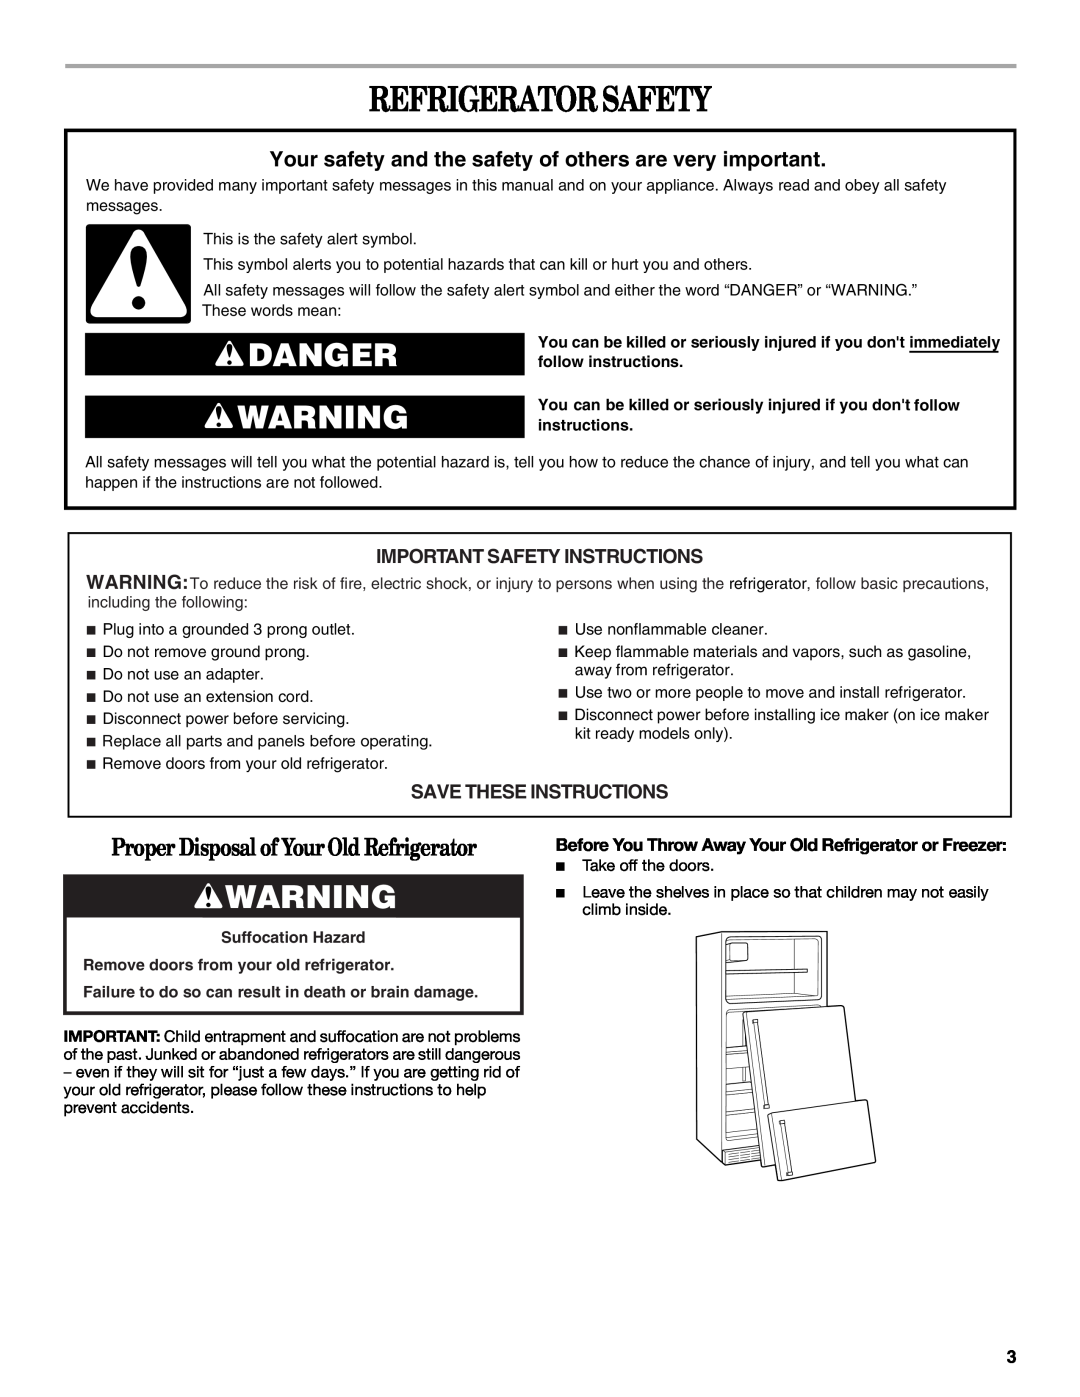 Amana W10162526A Refrigerator Safety, Danger, Important Safety Instructions, Save These Instructions, Suffocation Hazard 